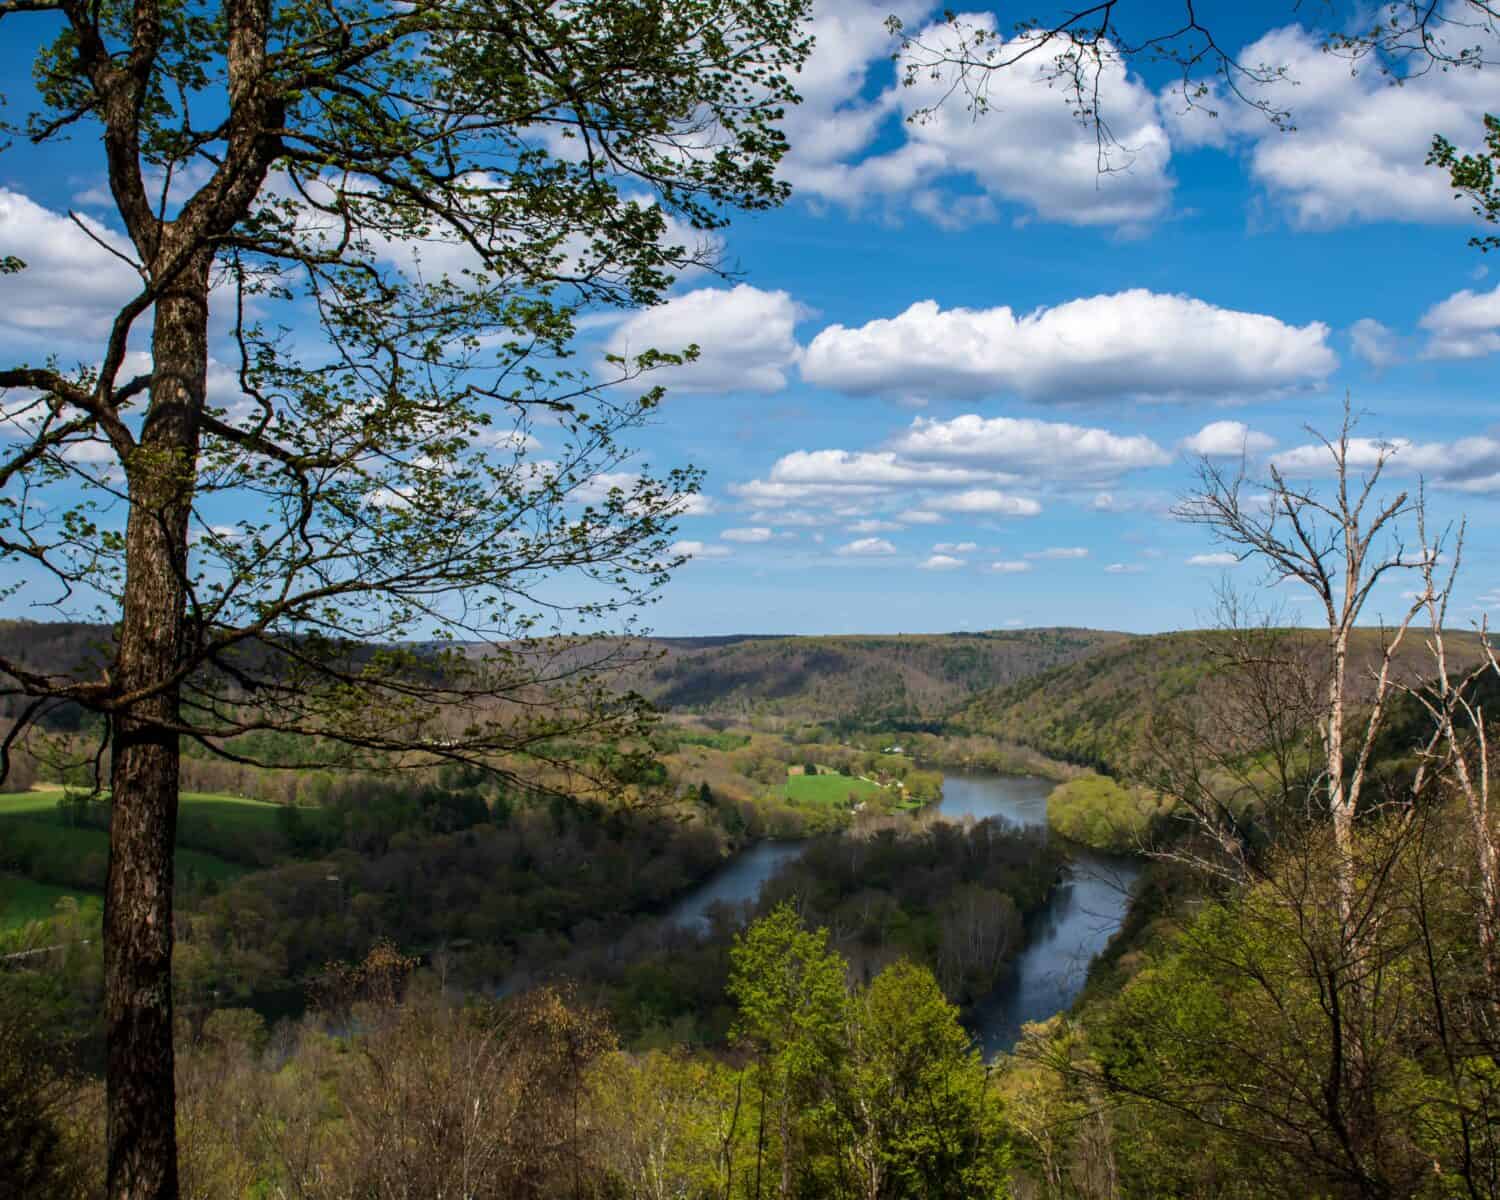 The view from the Tidioute Overlook of the Allegheny River valley on a sunny spring day